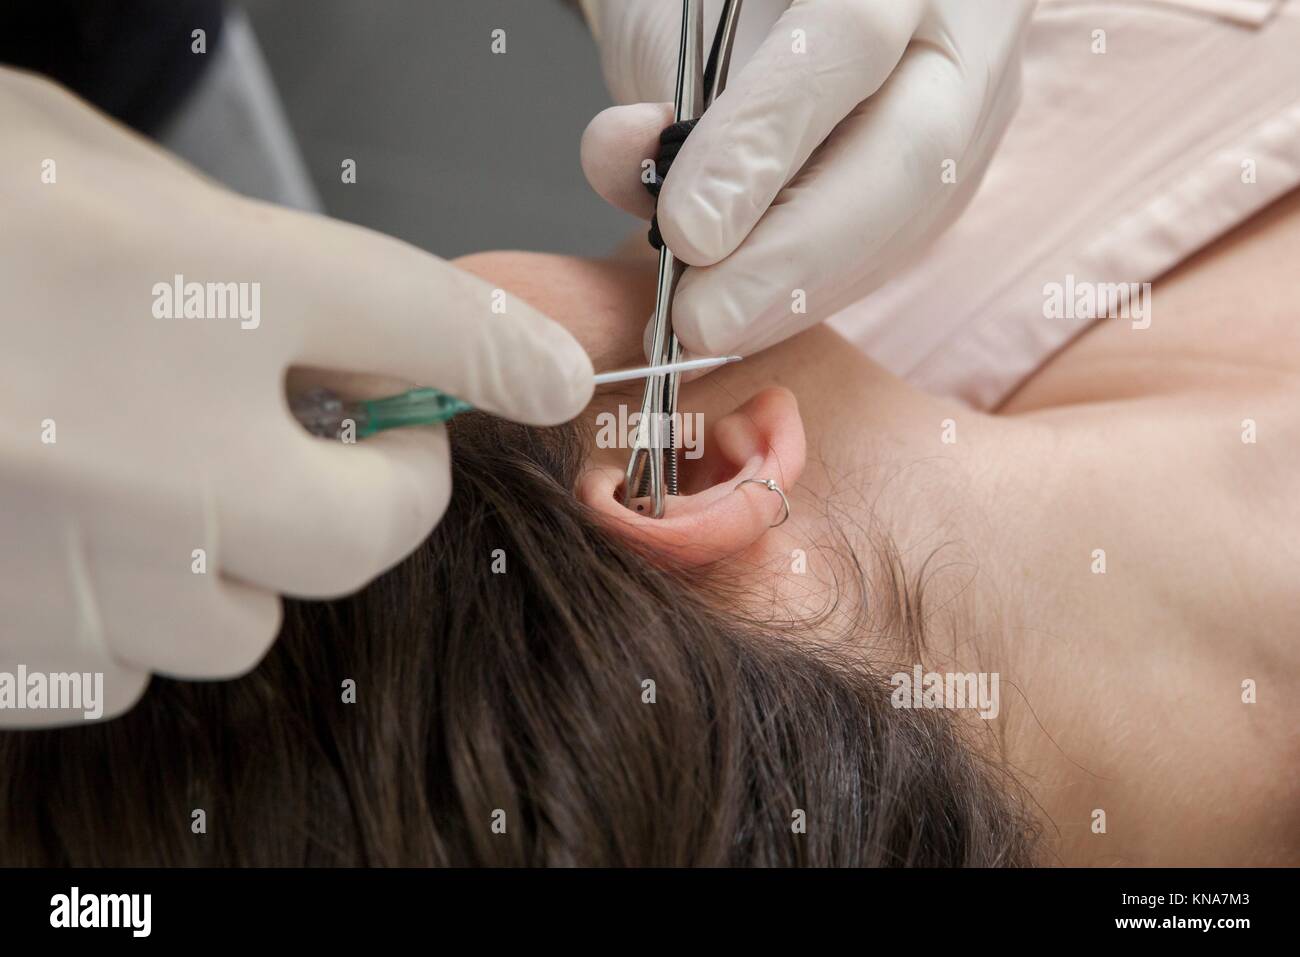 Professional making a piercing hole on ear with indwelling cannula method. Rook type. Gripping the ear. Stock Photo